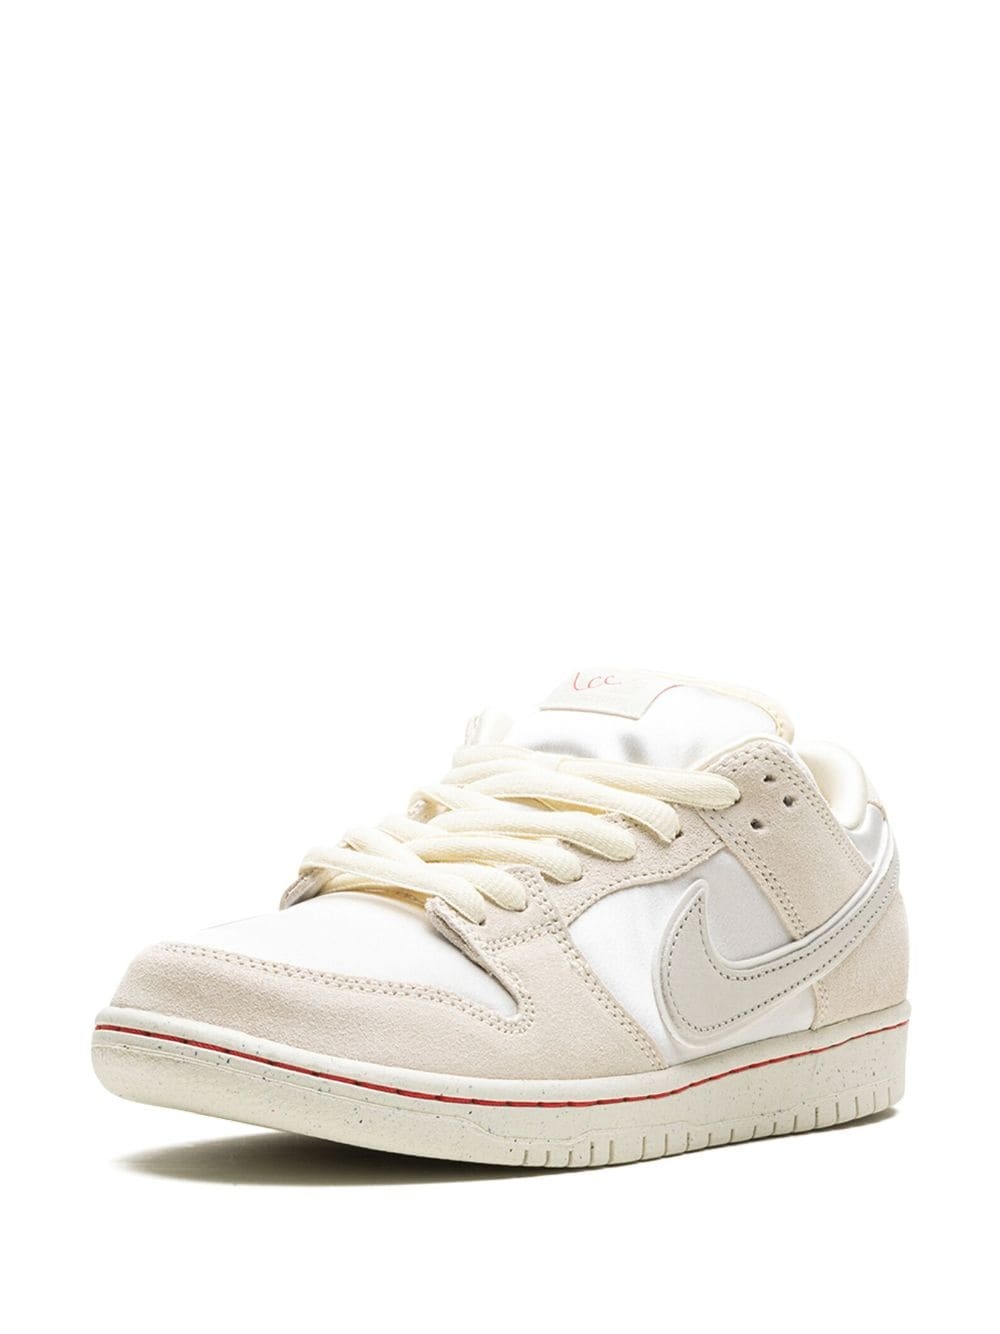 SB Dunk Low "Valentine's Day - Low Love Found" sneakers - 4